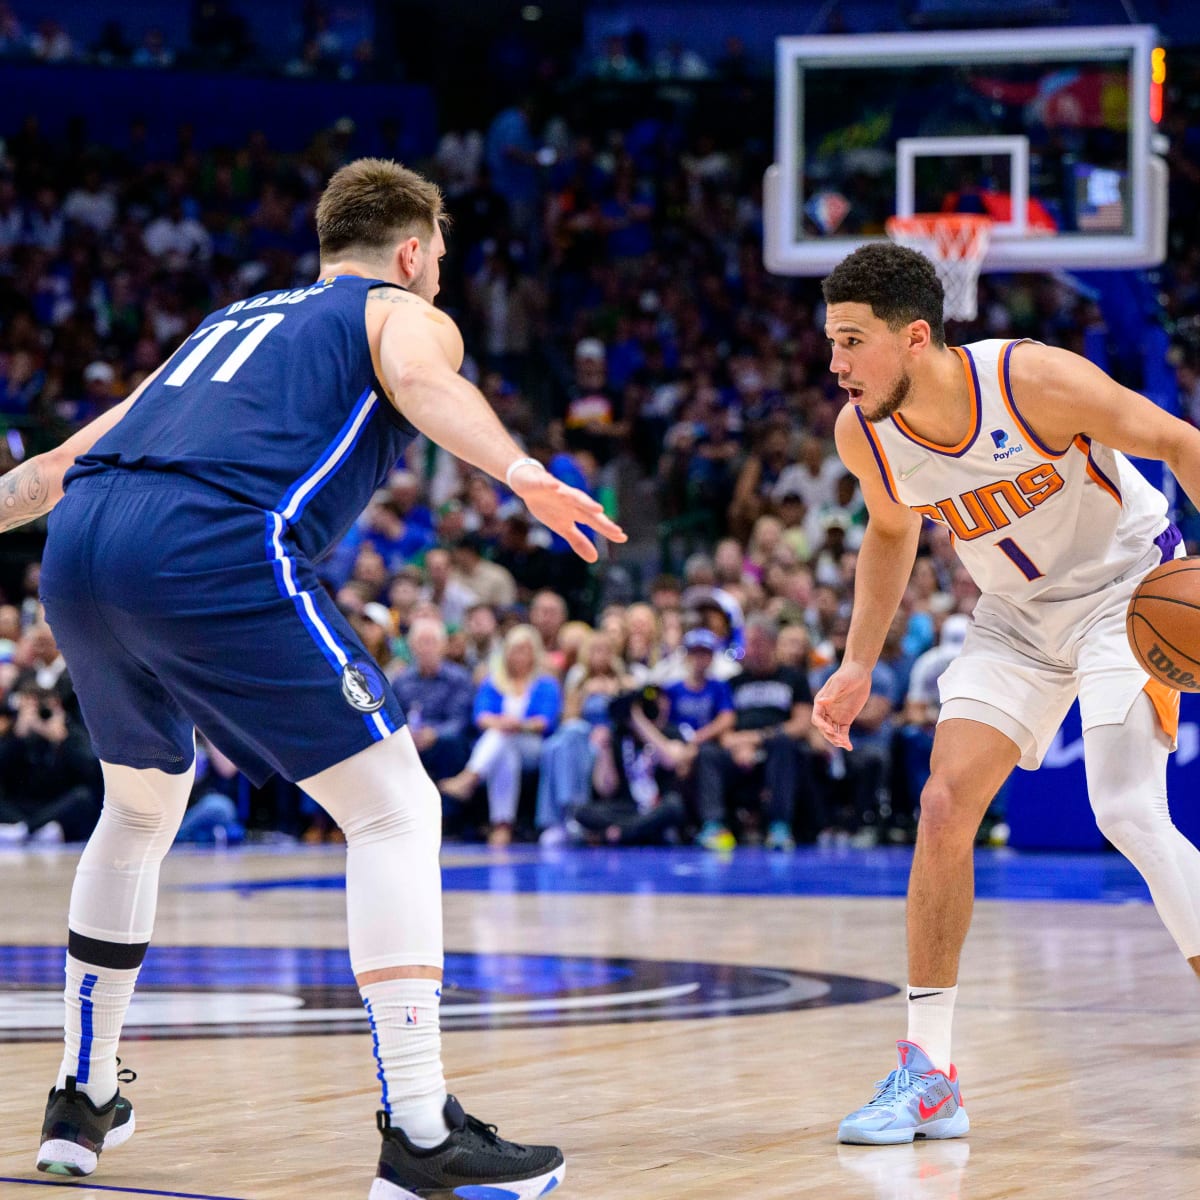 Devin Booker has a mother” – Luka Doncic proposing girlfriend